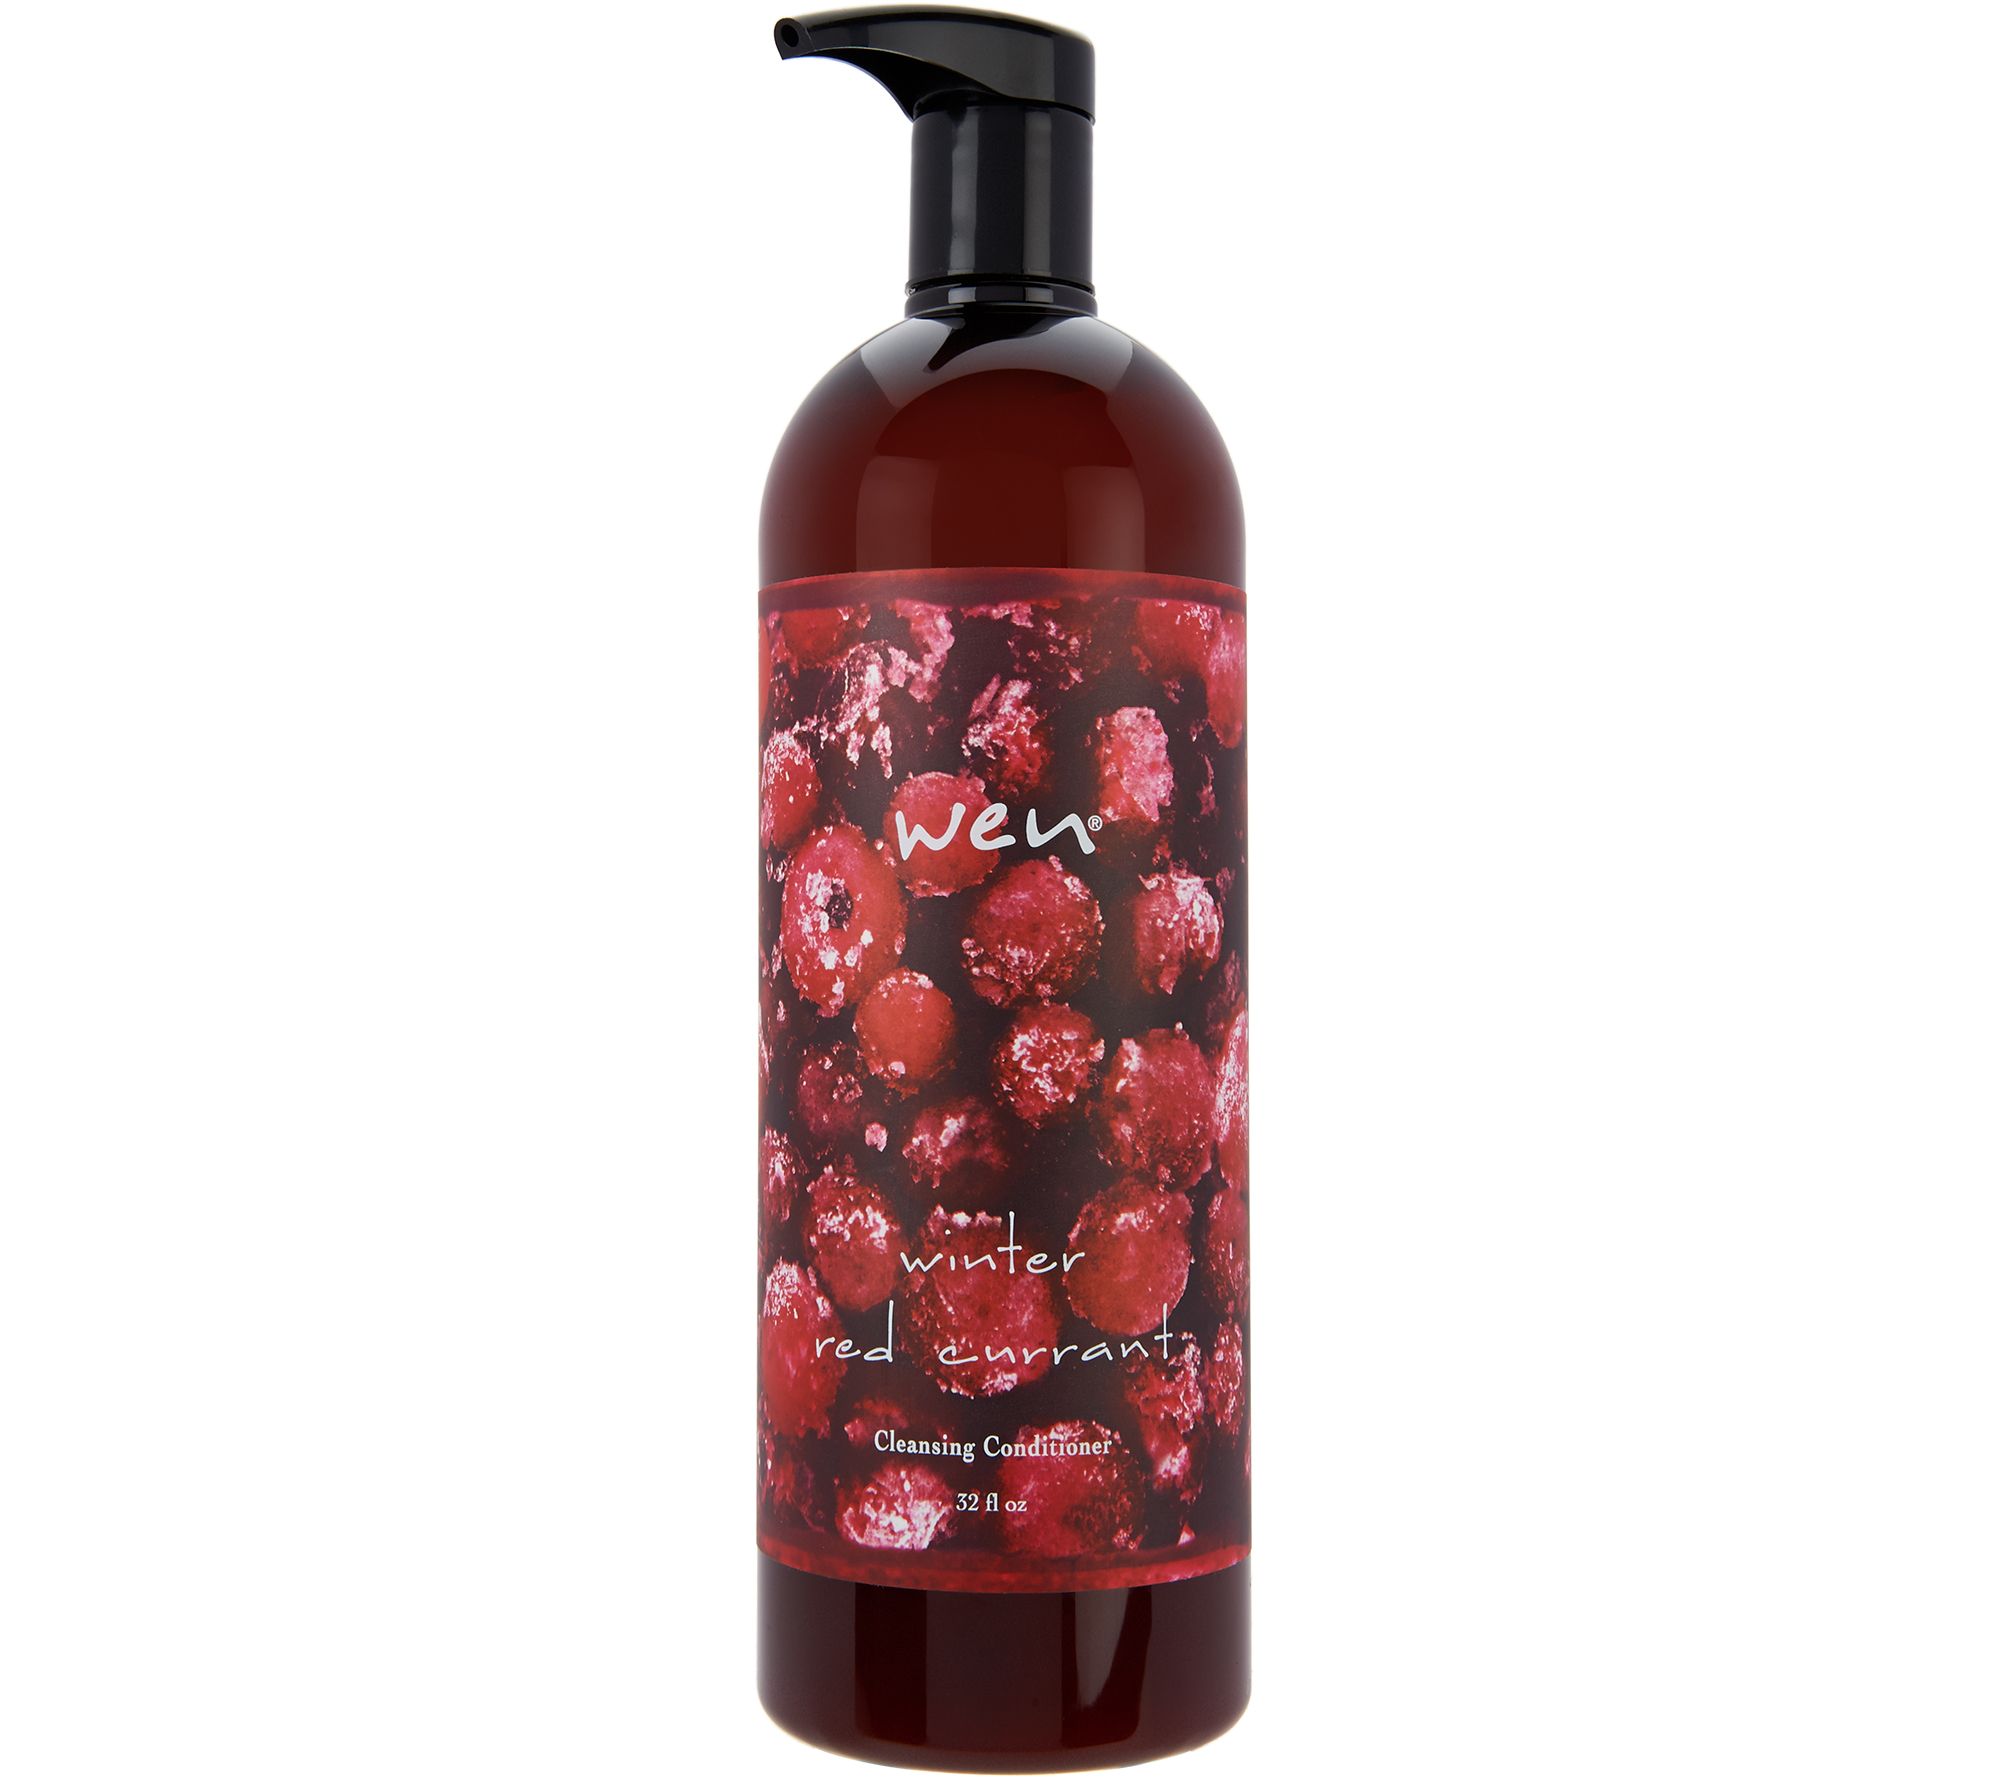 WEN by ChazDean 32 oz. Winter Cleansing Conditioner Auto-Delivery - A265189